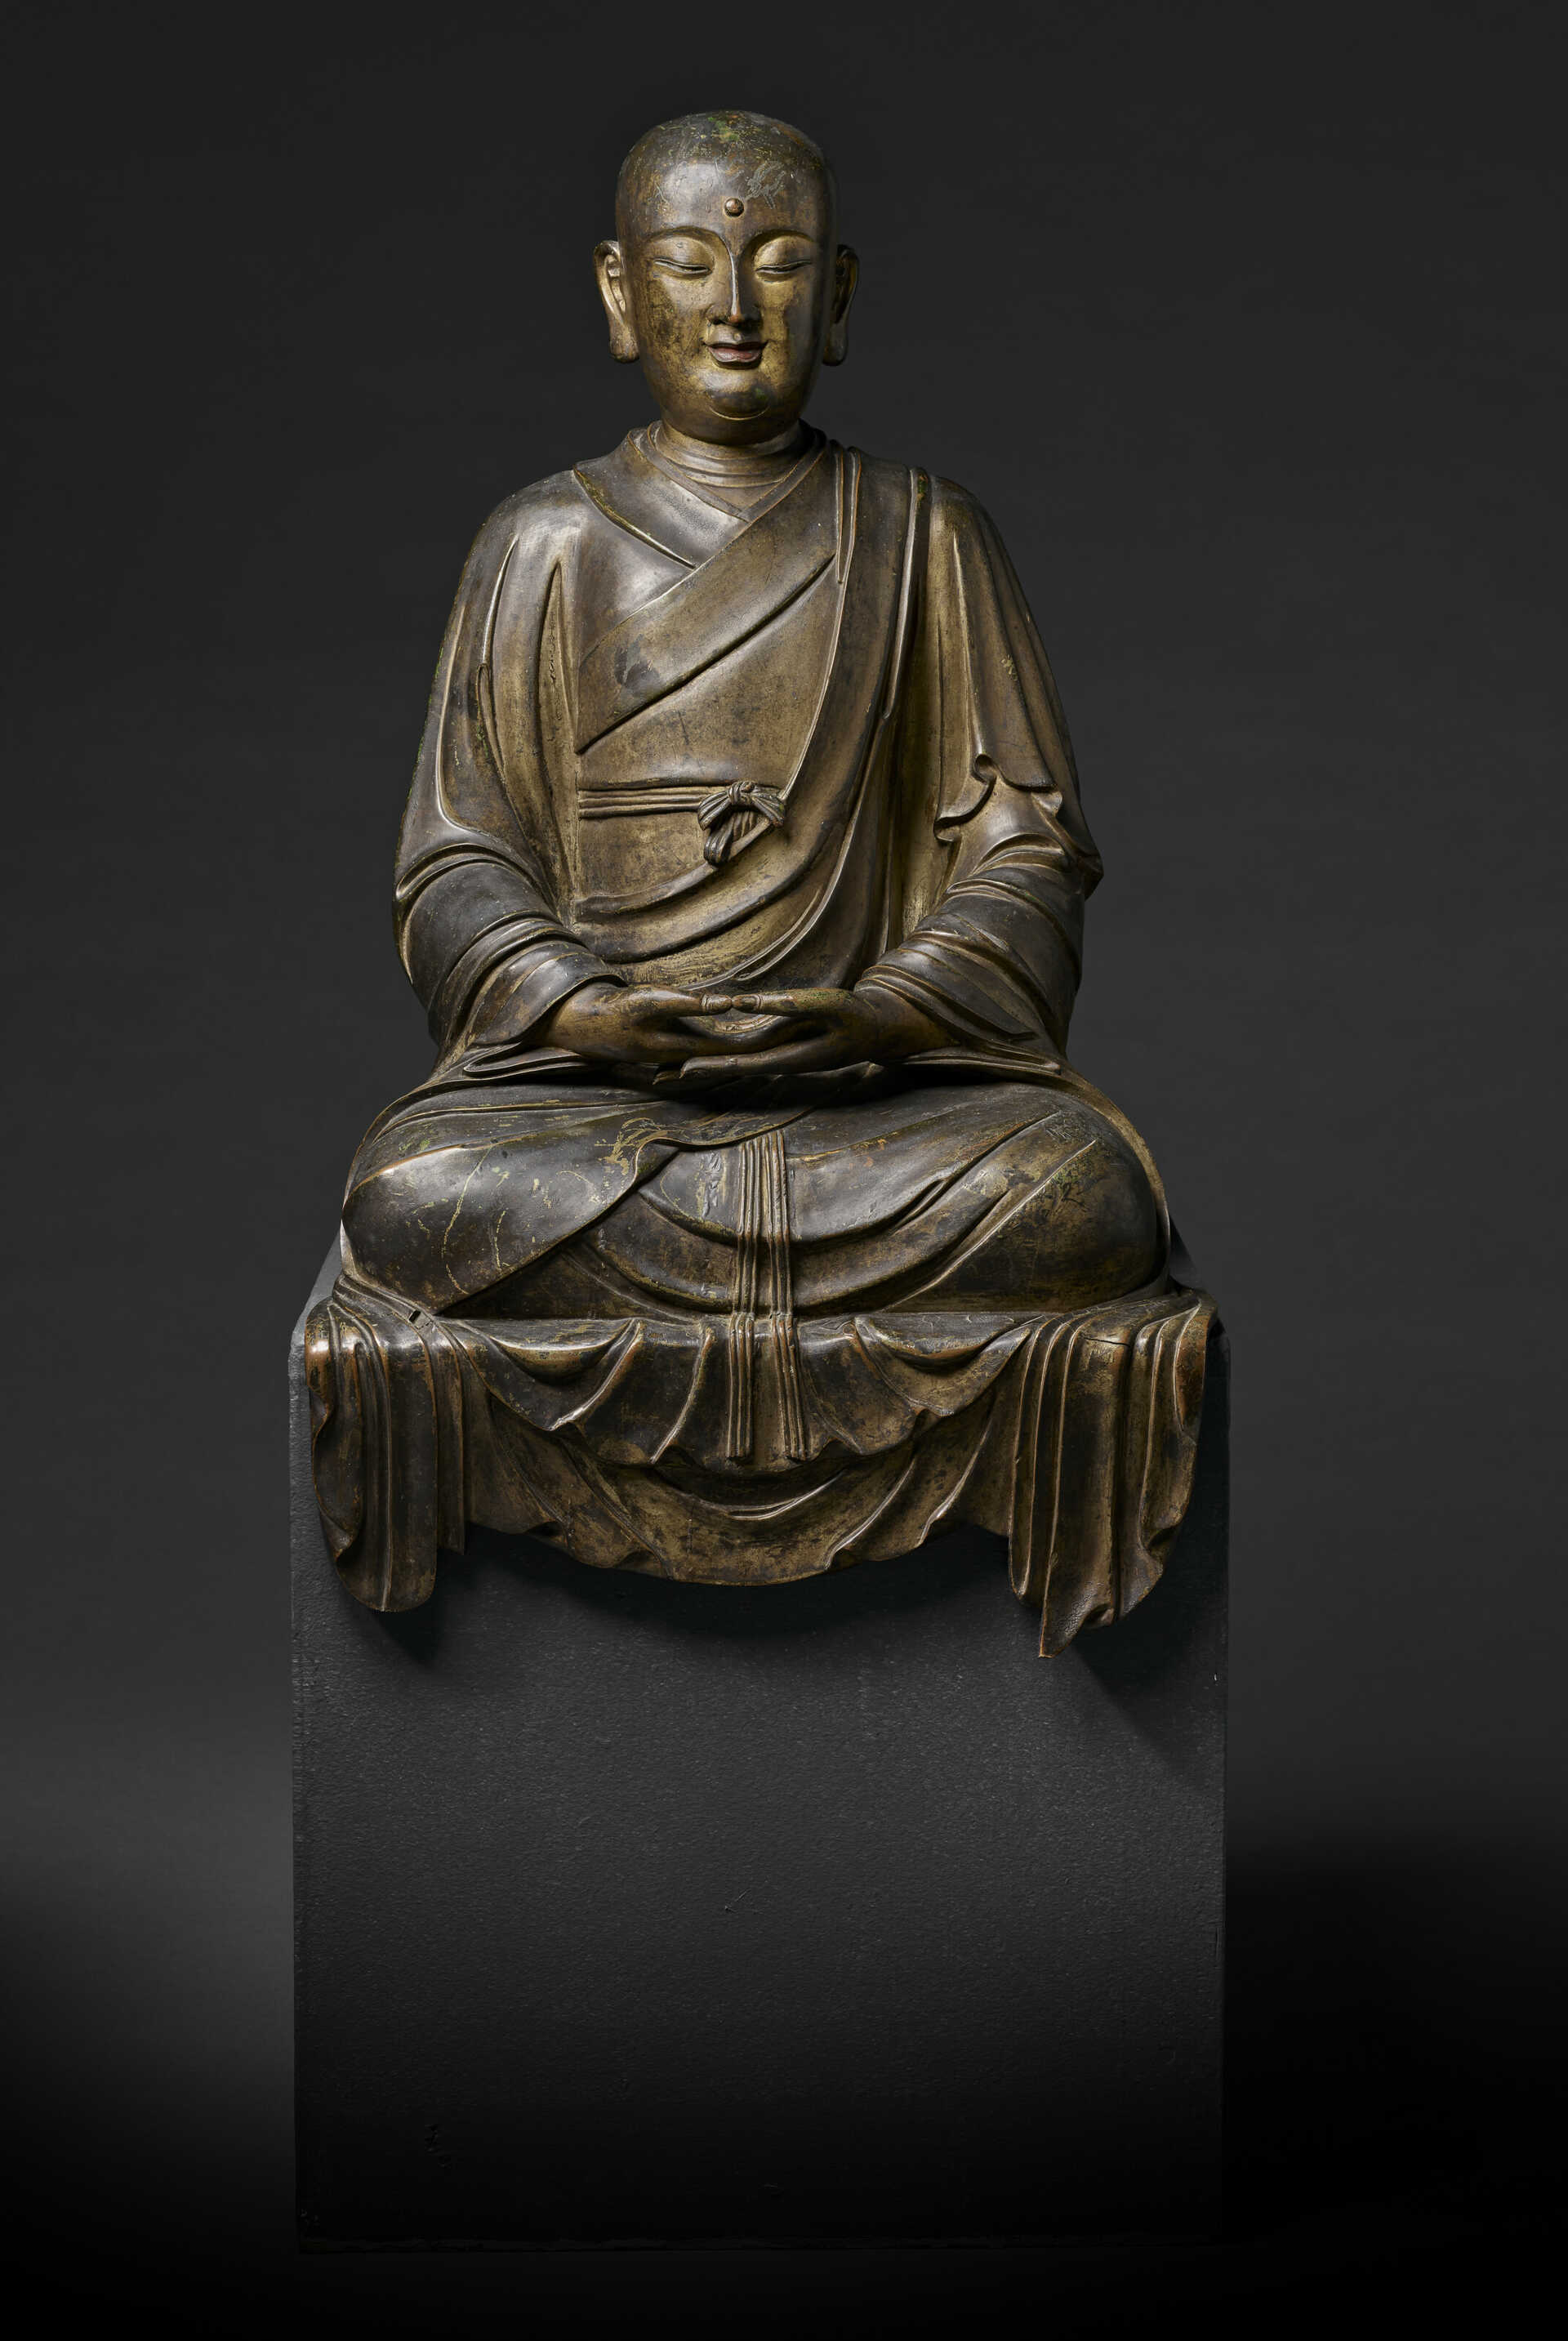 A VERY RARE AND LARGE GILT-BRONZE FIGURE OF A SEATED LUOHAN